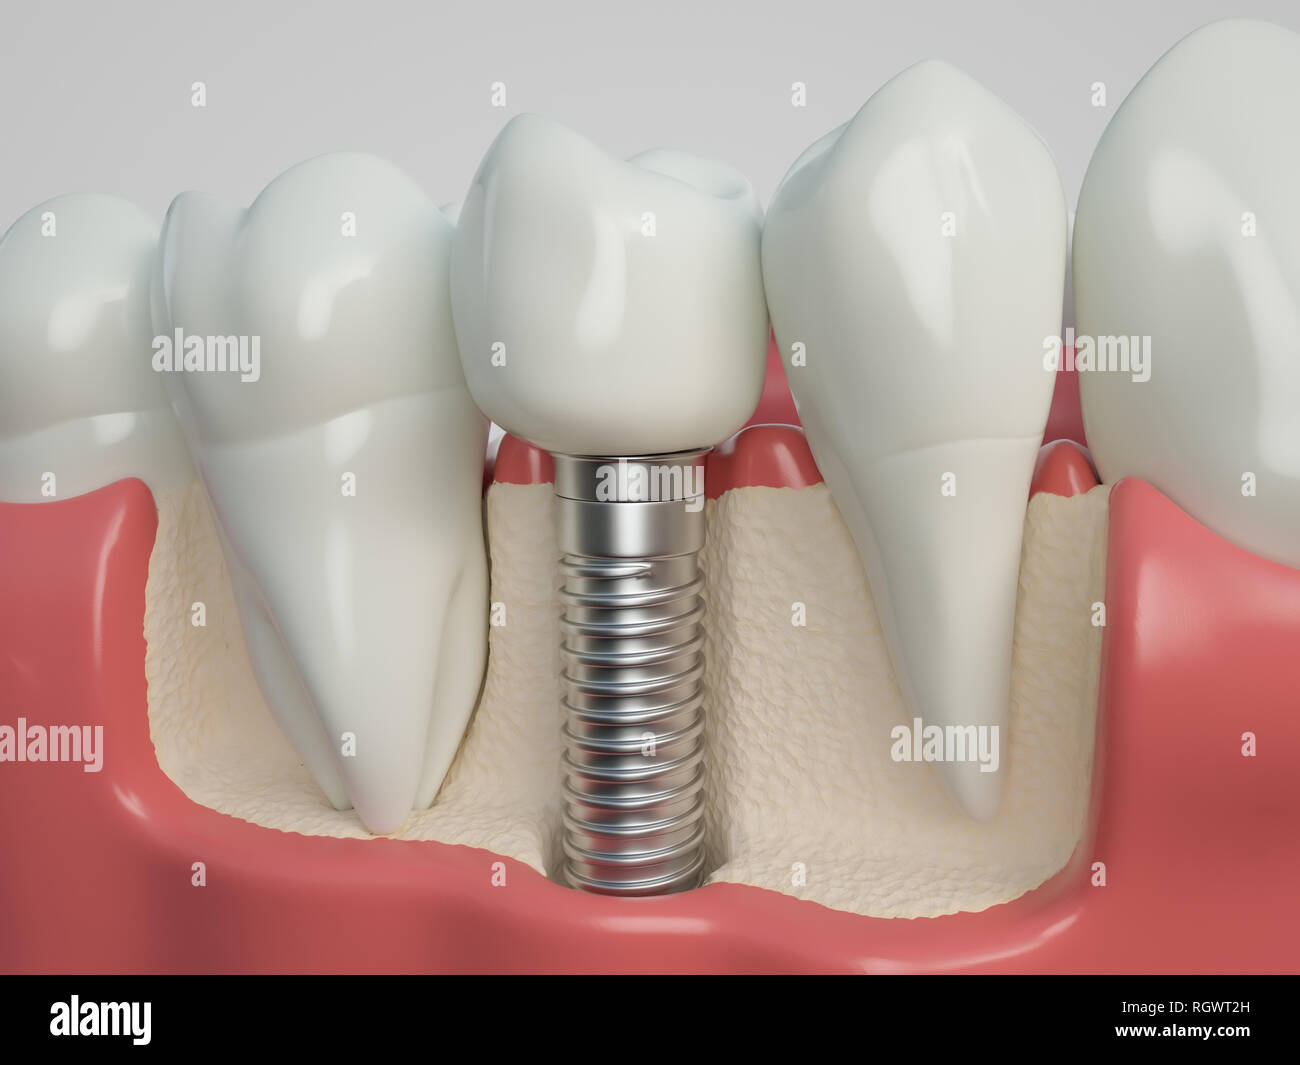 Tooth human implant - 3D Rendering Stock Photo